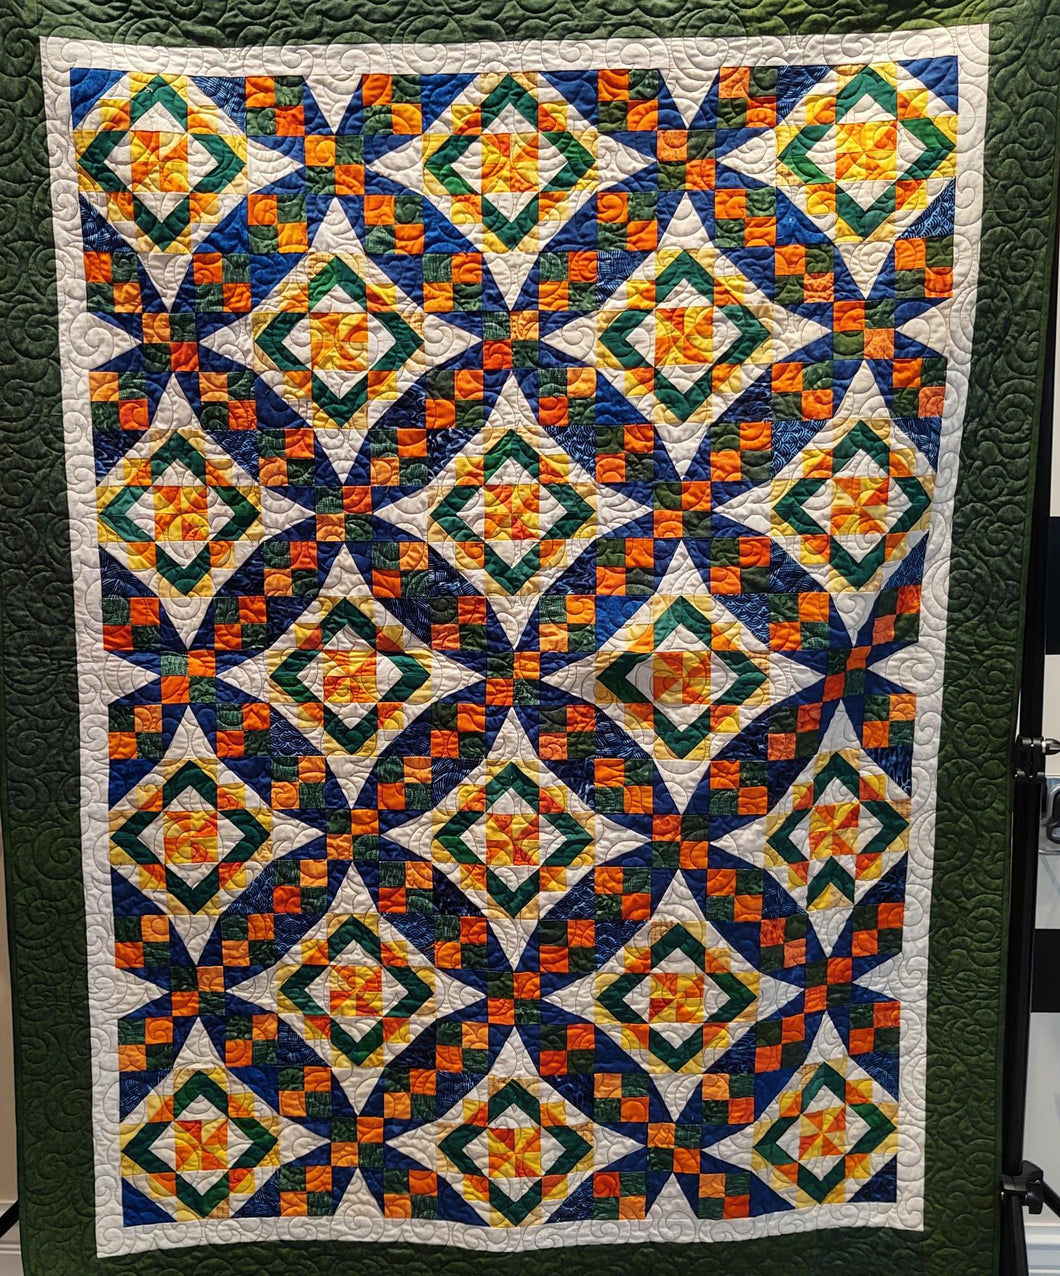 Kathy's Quilts UF Quilt for Gator Fans